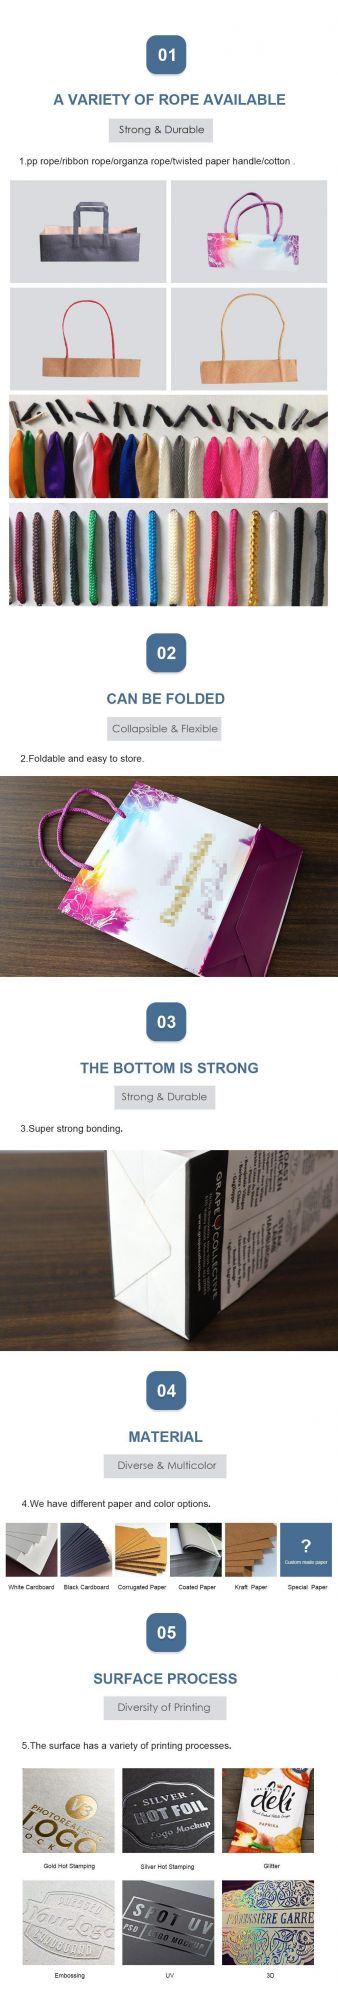 Wholesale Cheap Price Luxury Famous Brand Gift Custom Printed Shopping Paper Bag with Your Own Logo